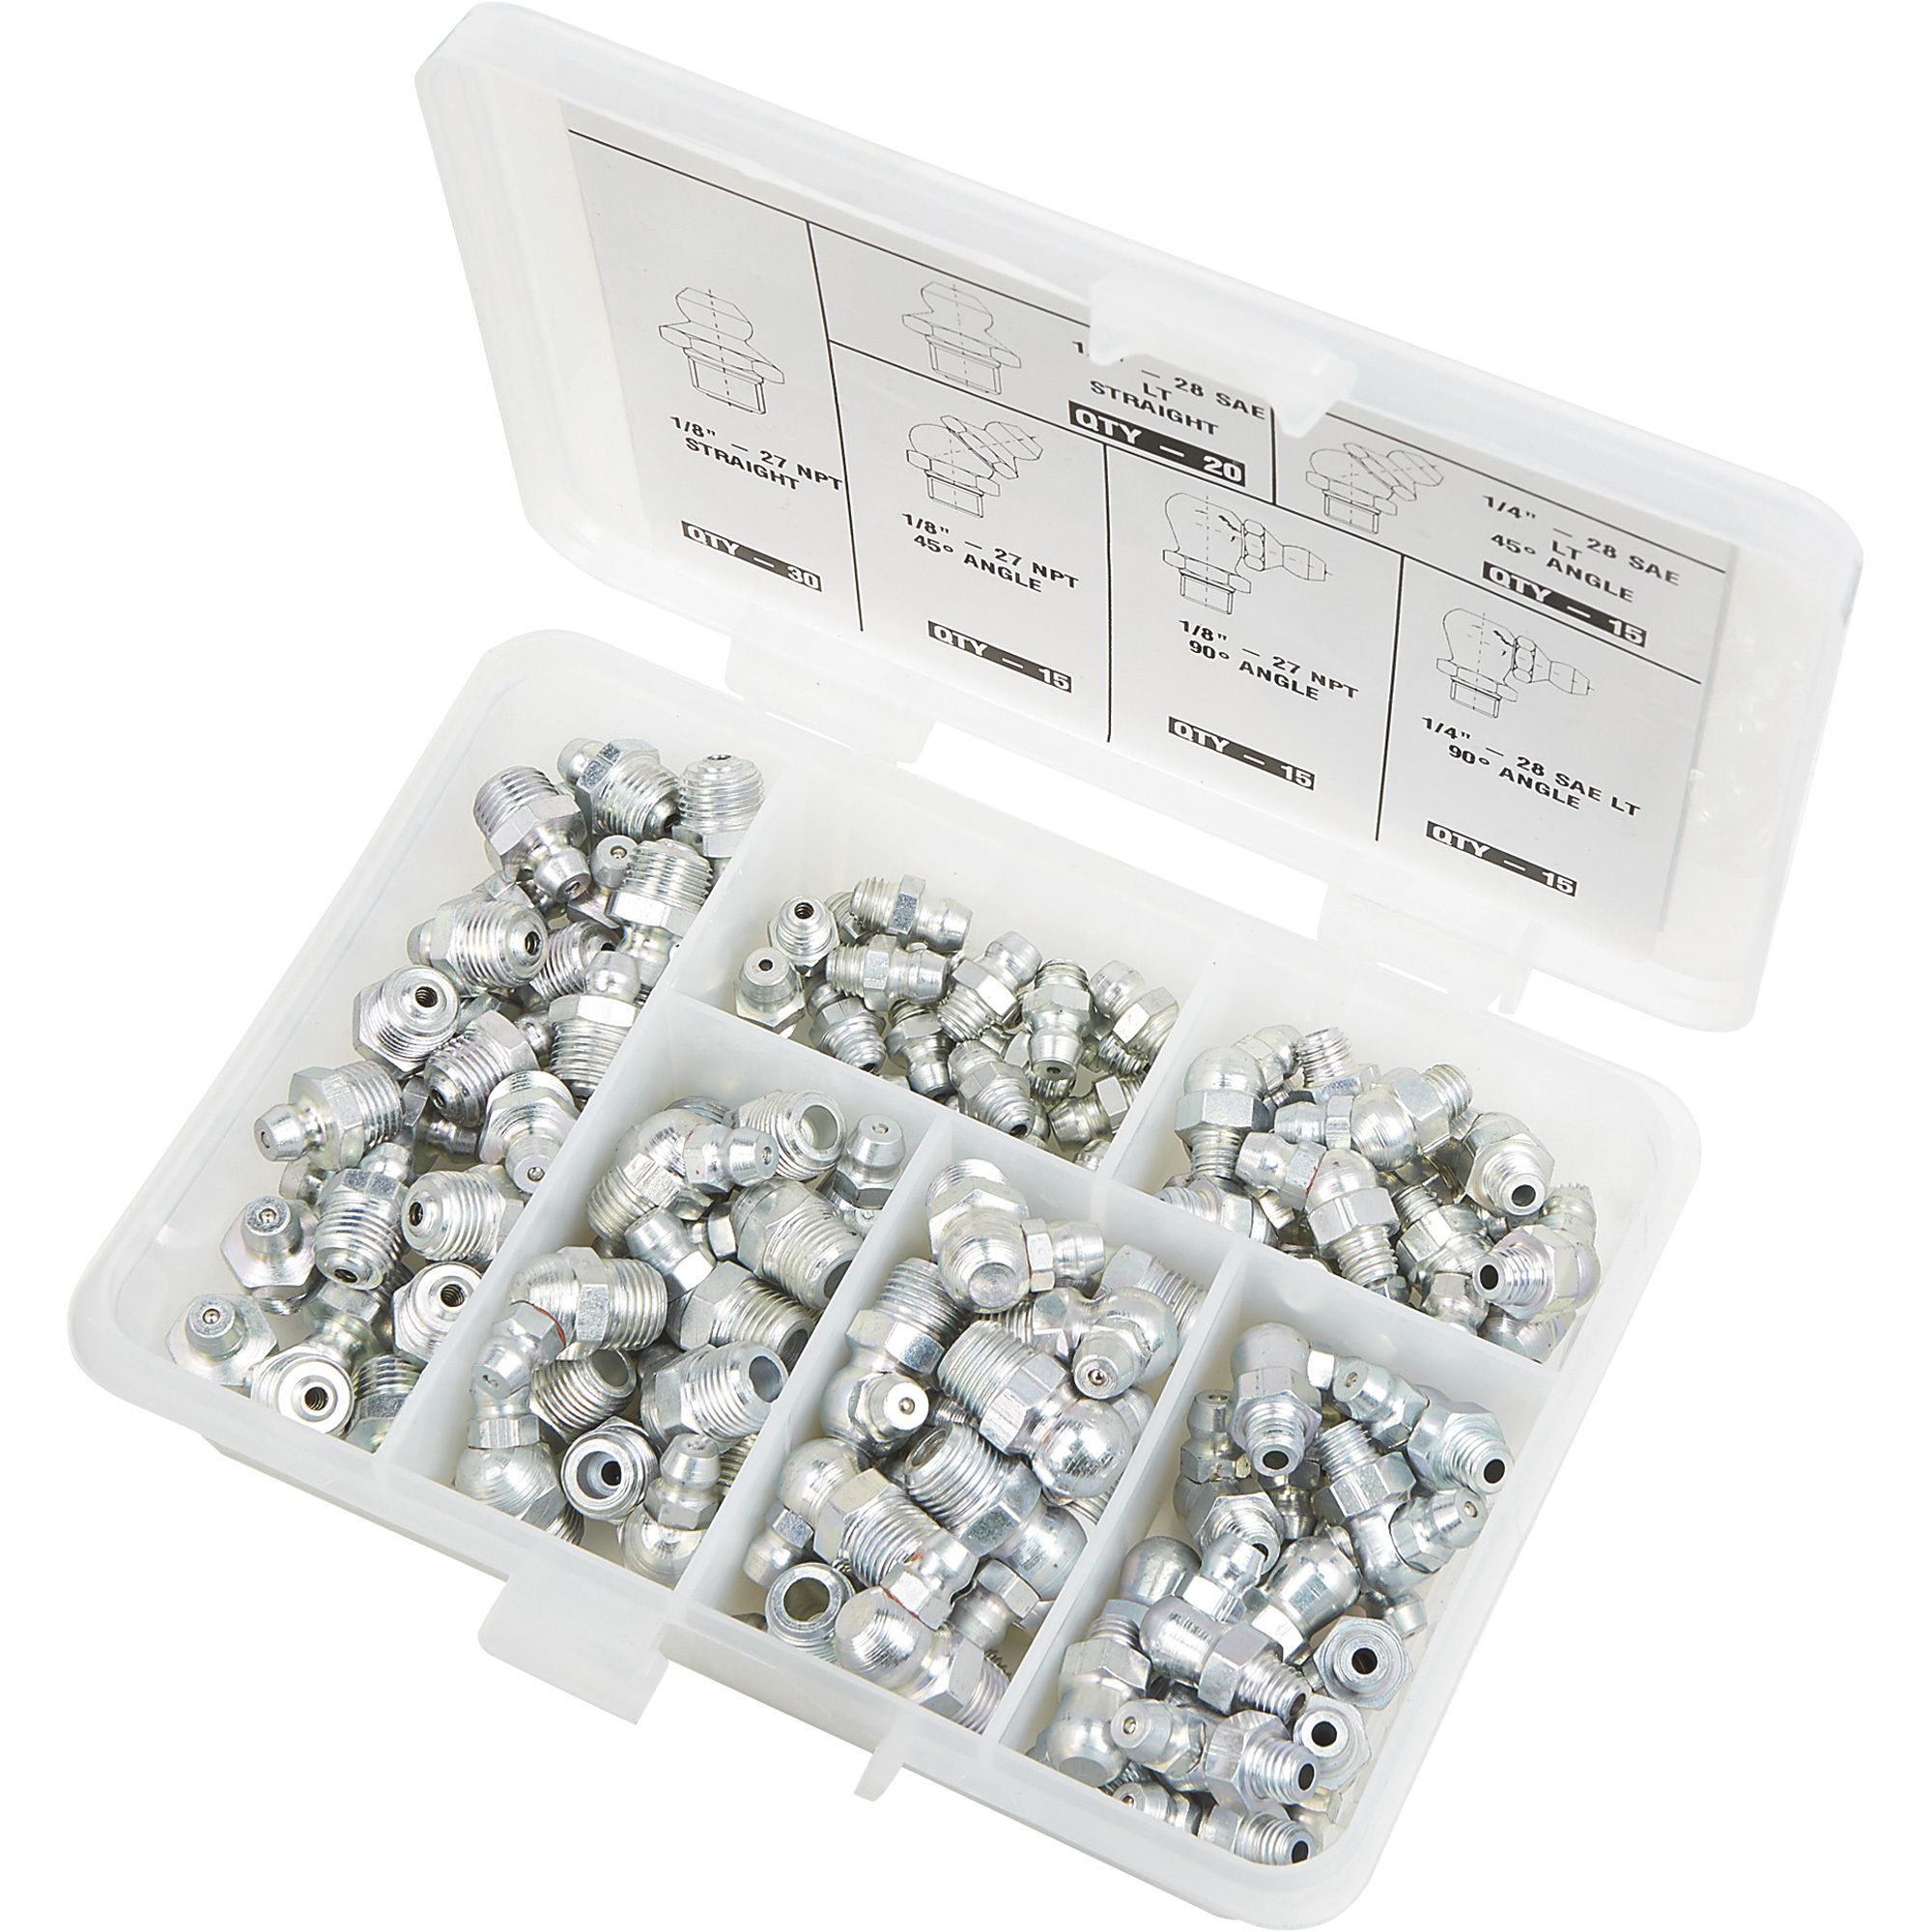 Roughneck Grease Fitting Kit,110-Piece, SAE